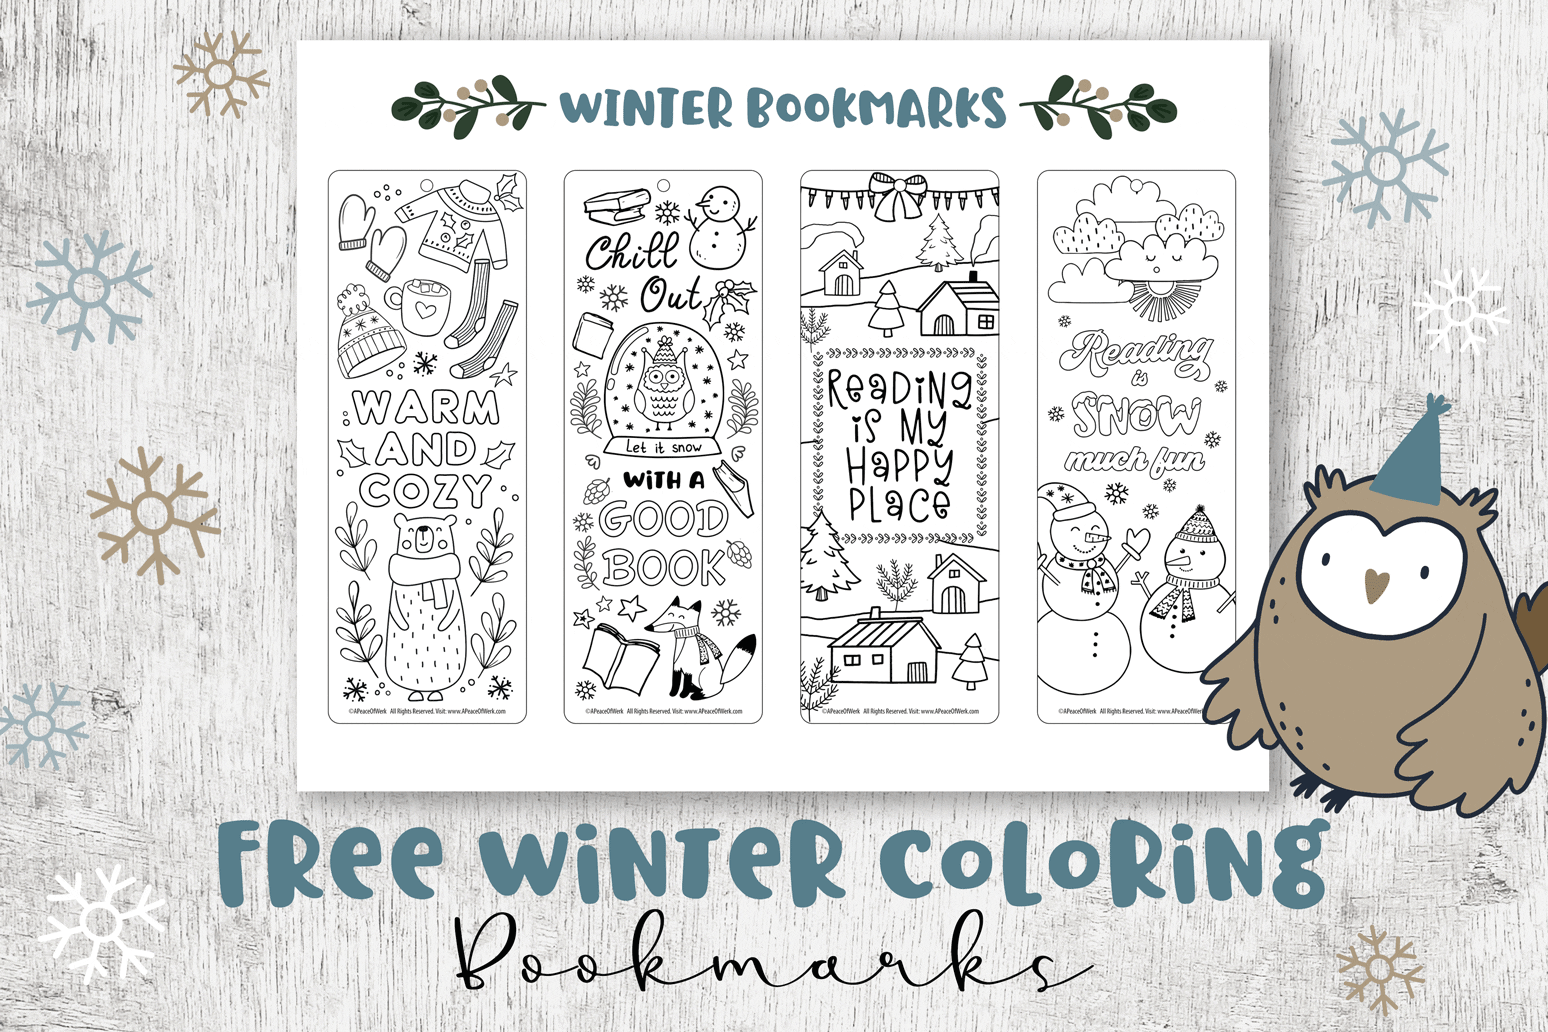 Free-Winter-Coloring-Bookmarks